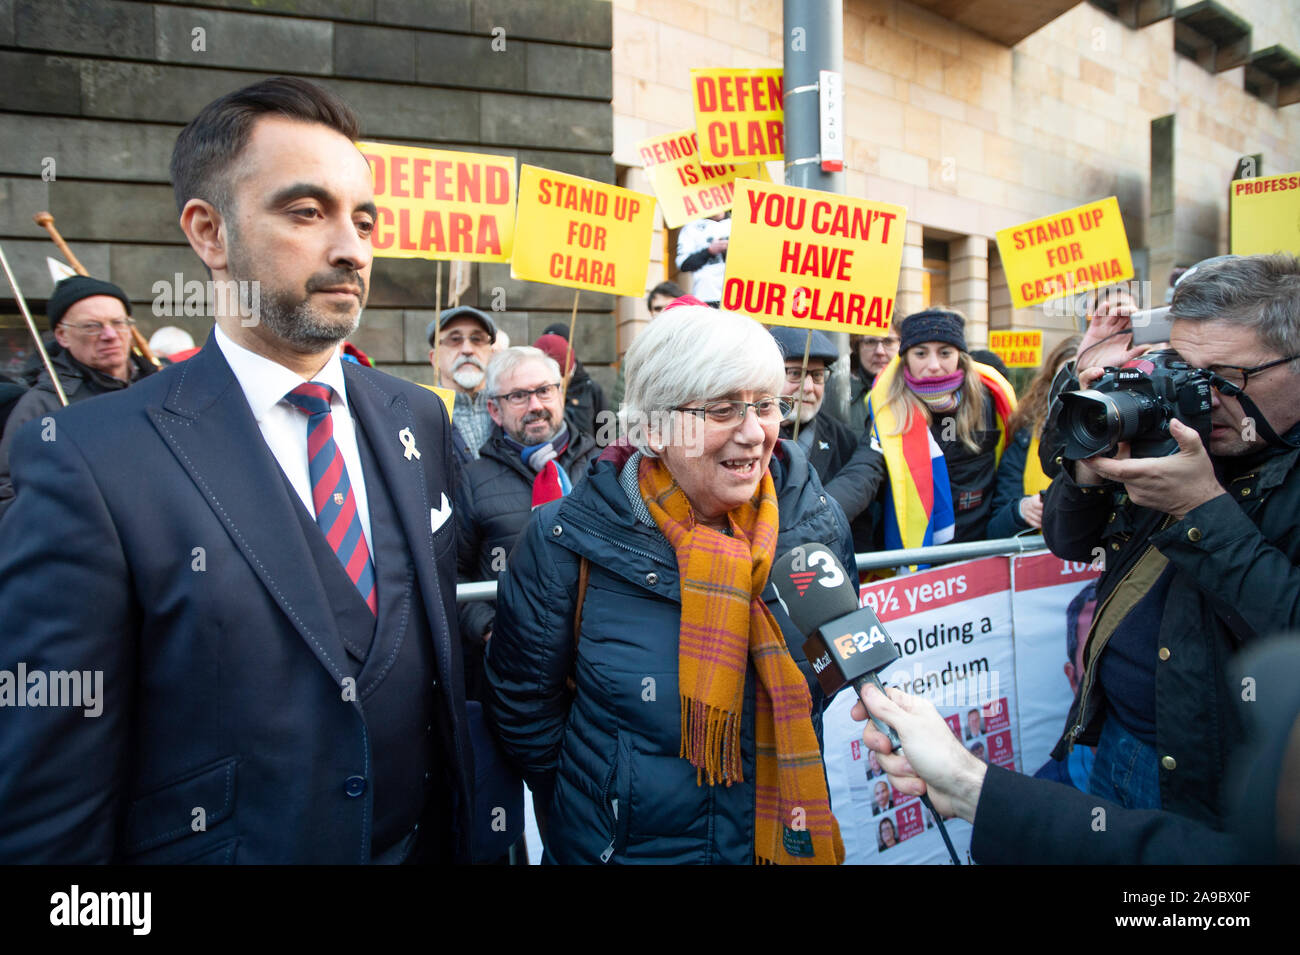 Former Catalan politician and University of St Andrews professor Clara Ponsati, who is facing extradition from Scotland to Spain, with her lawyer Aamer Anwar, speaking to media outside St Leonard's Police Station in Edinburgh after being released on bail. Stock Photo